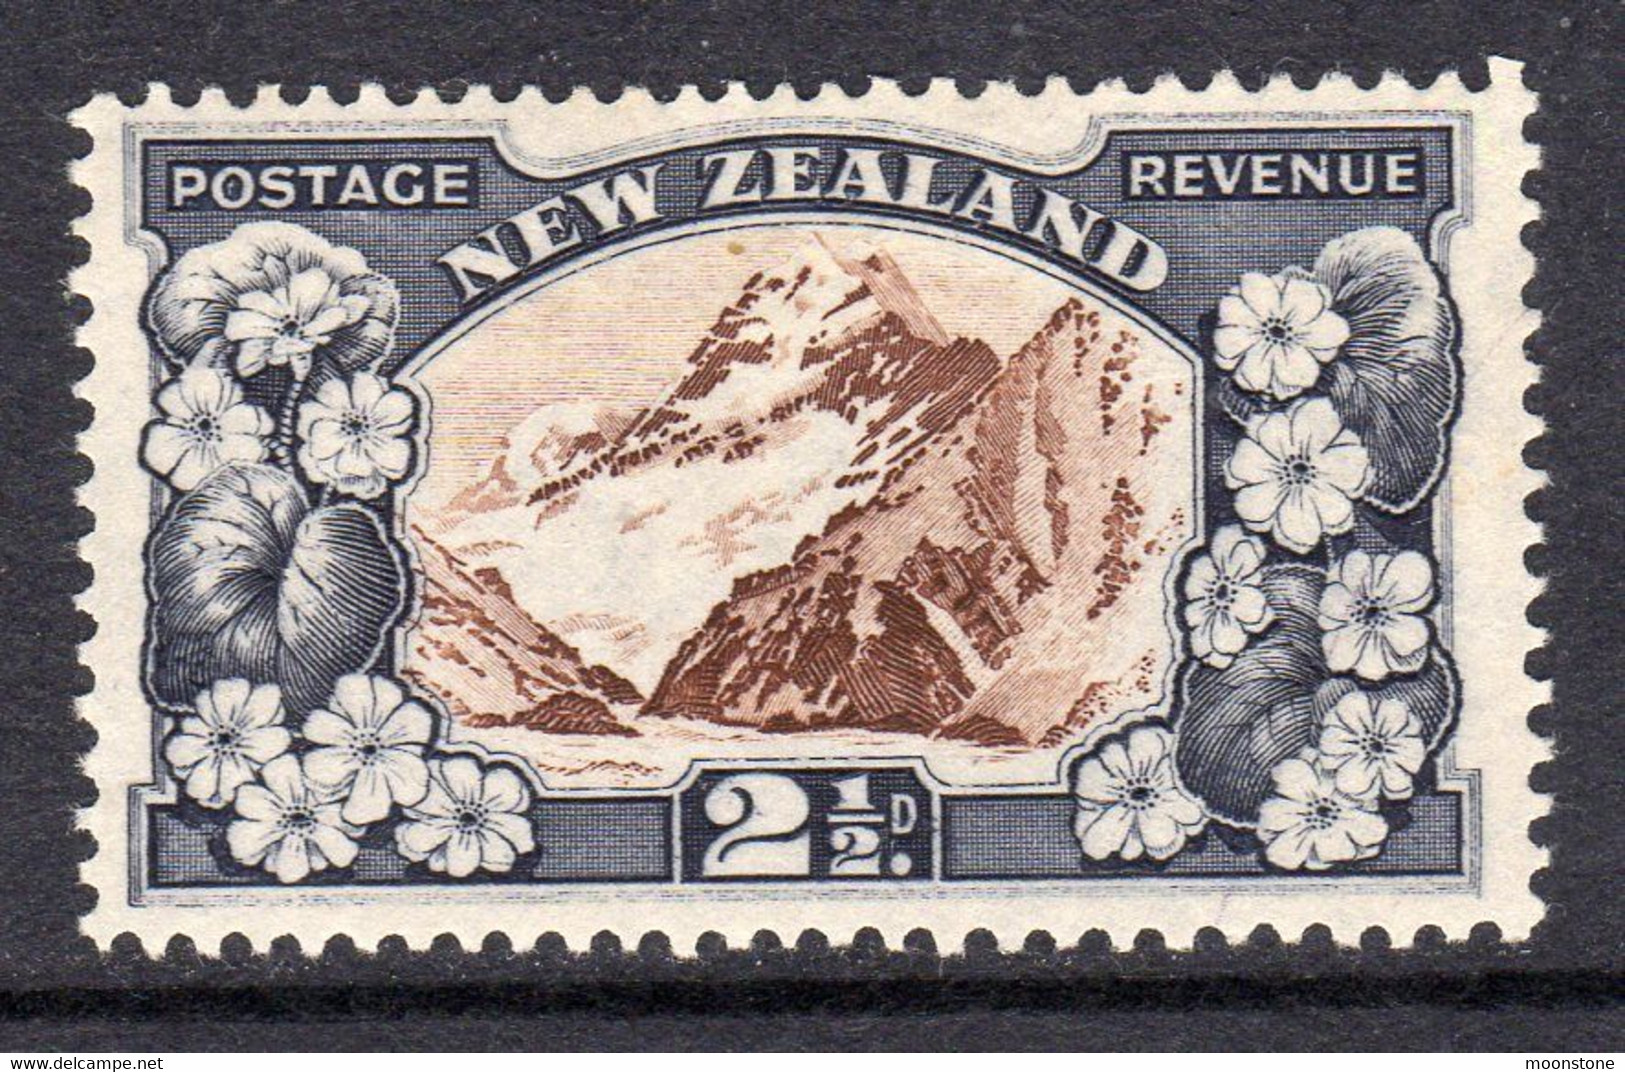 New Zealand GV 1936-42 2½d Mount Cook Definitive, Wmk. Multiple NZ & Star, Perf. 14x13½, Hinged Mint, SG 581 (A) - Unused Stamps